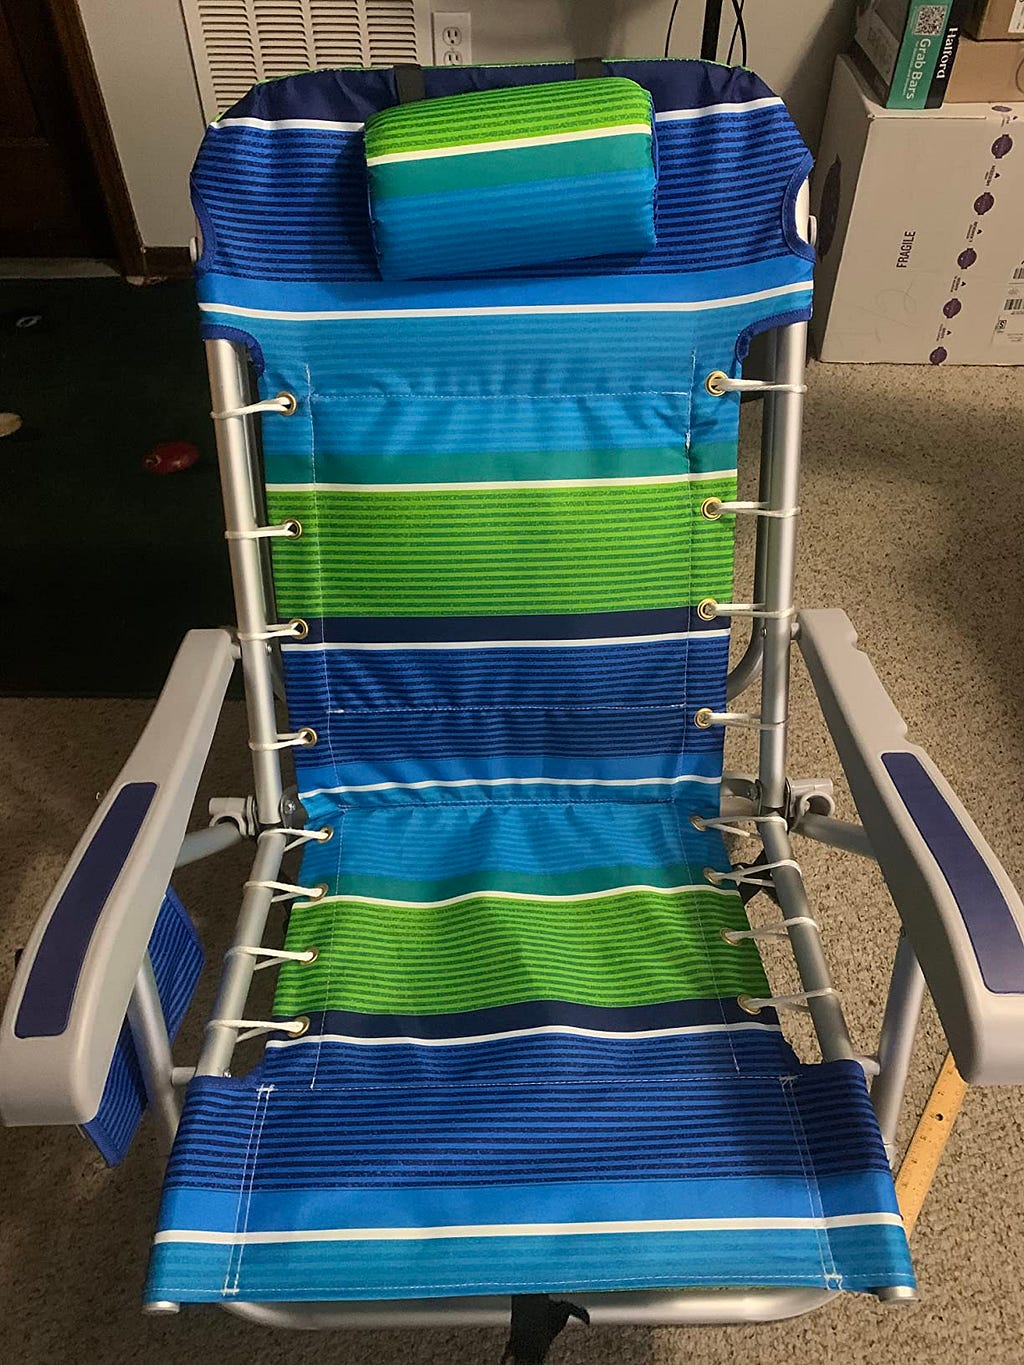 Best Beach Chair For A Bad Back